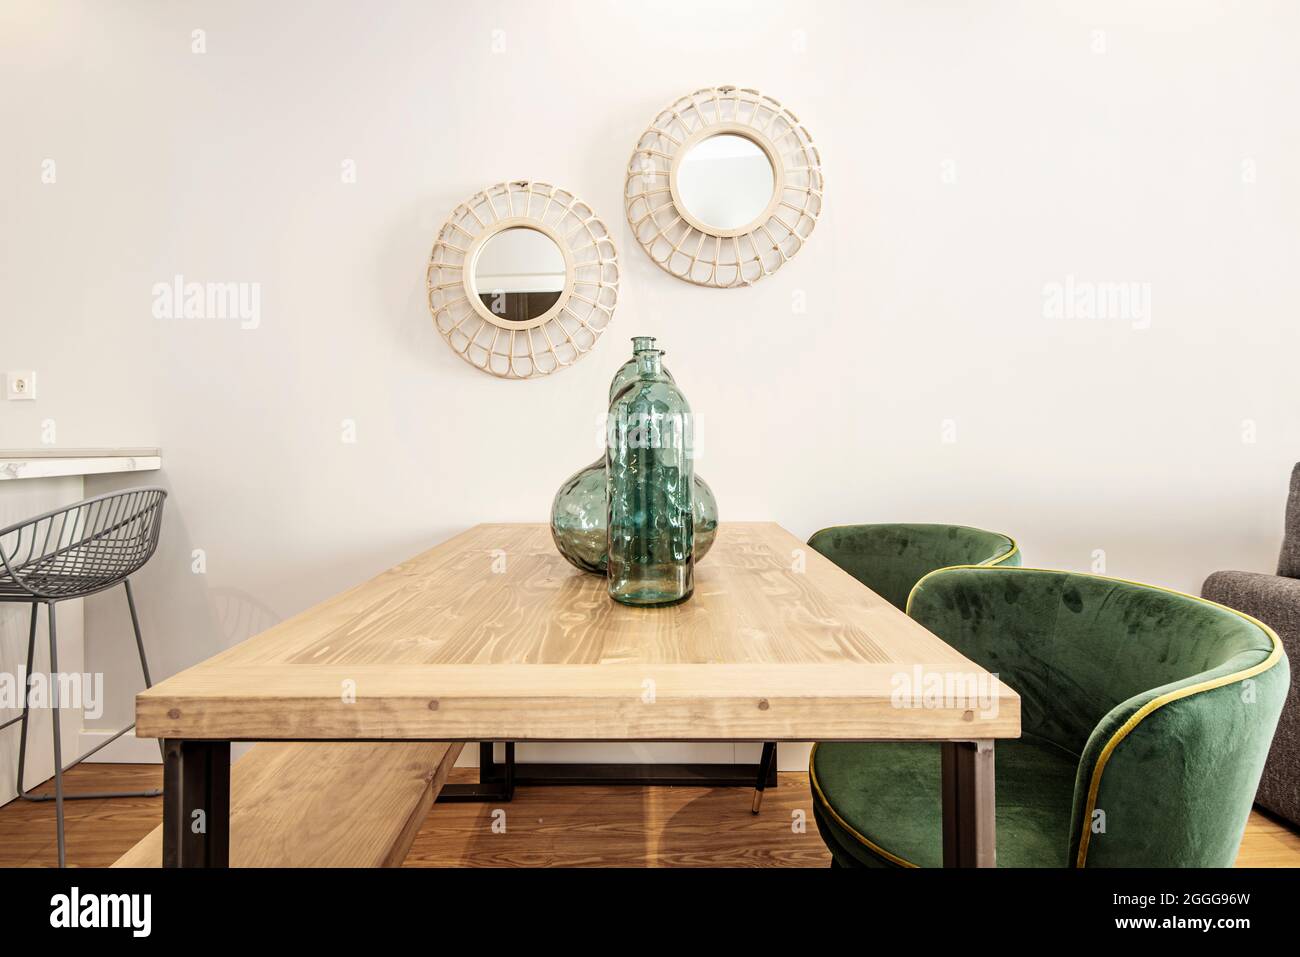 Veined wood table, mirrors on the wall, large vases and green velvet upholstery chairs. Dining room in a vacation rental apartment Stock Photo